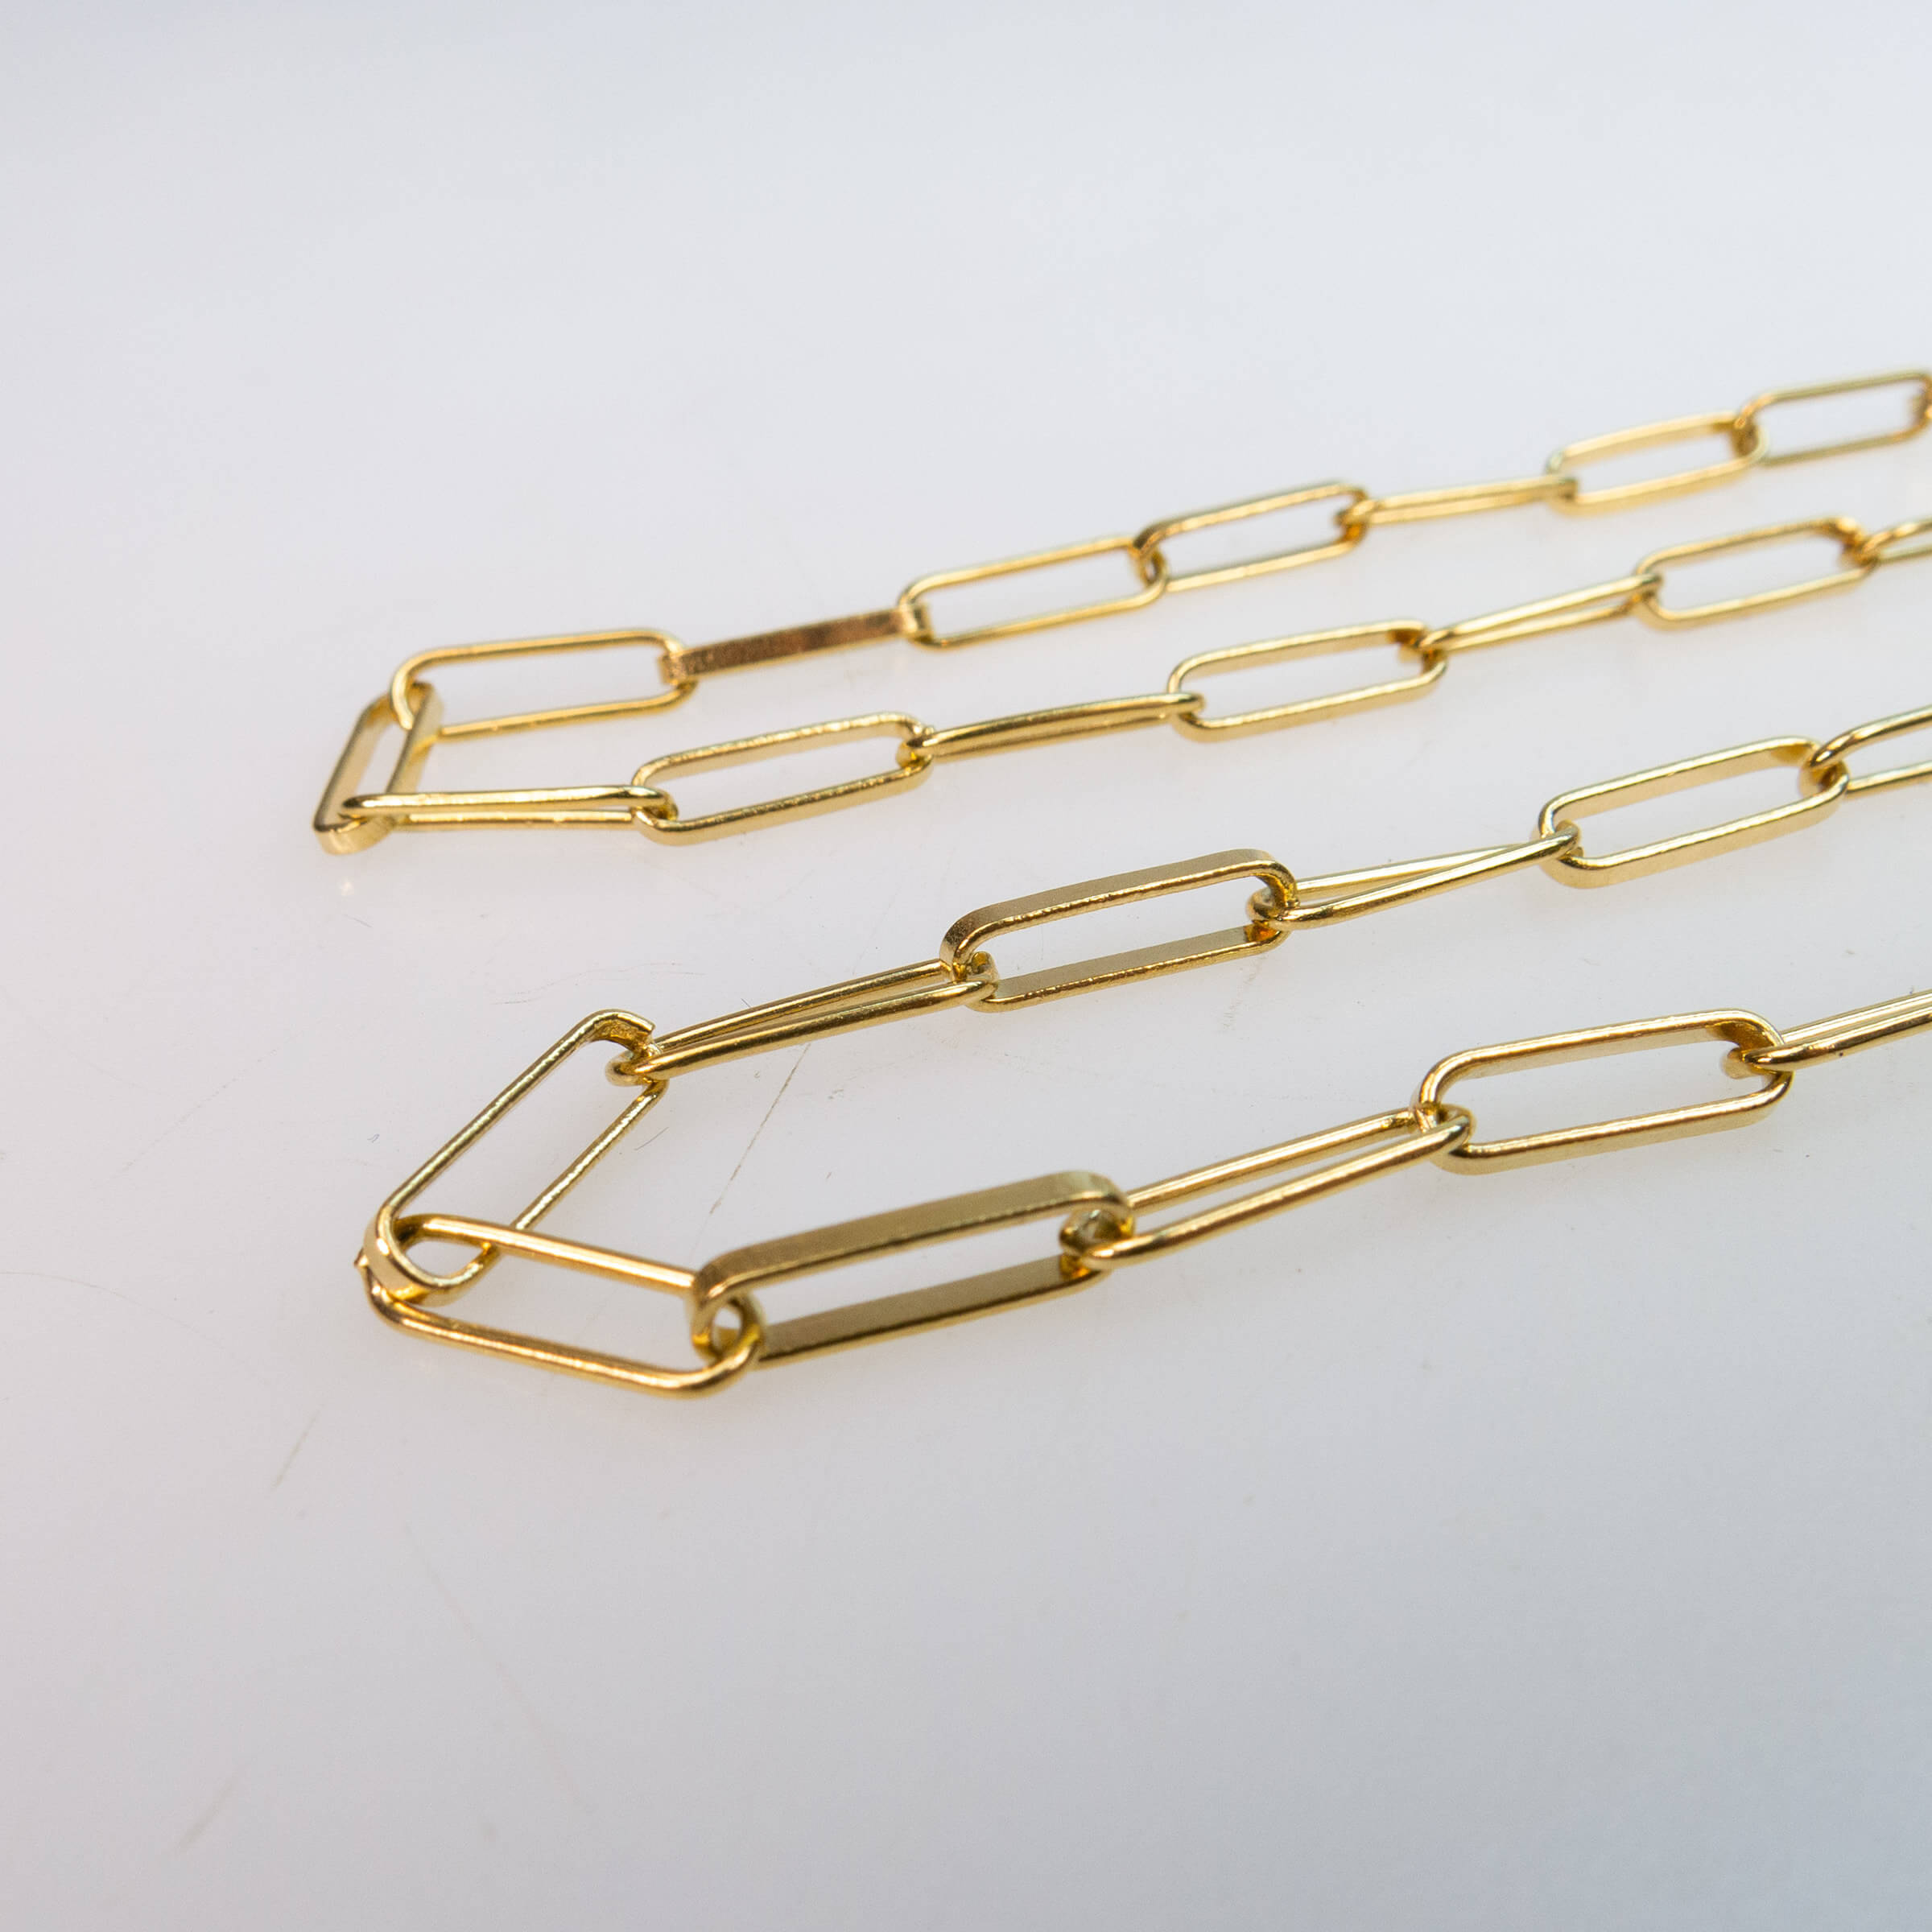 2 x 18k Yellow Gold Chains